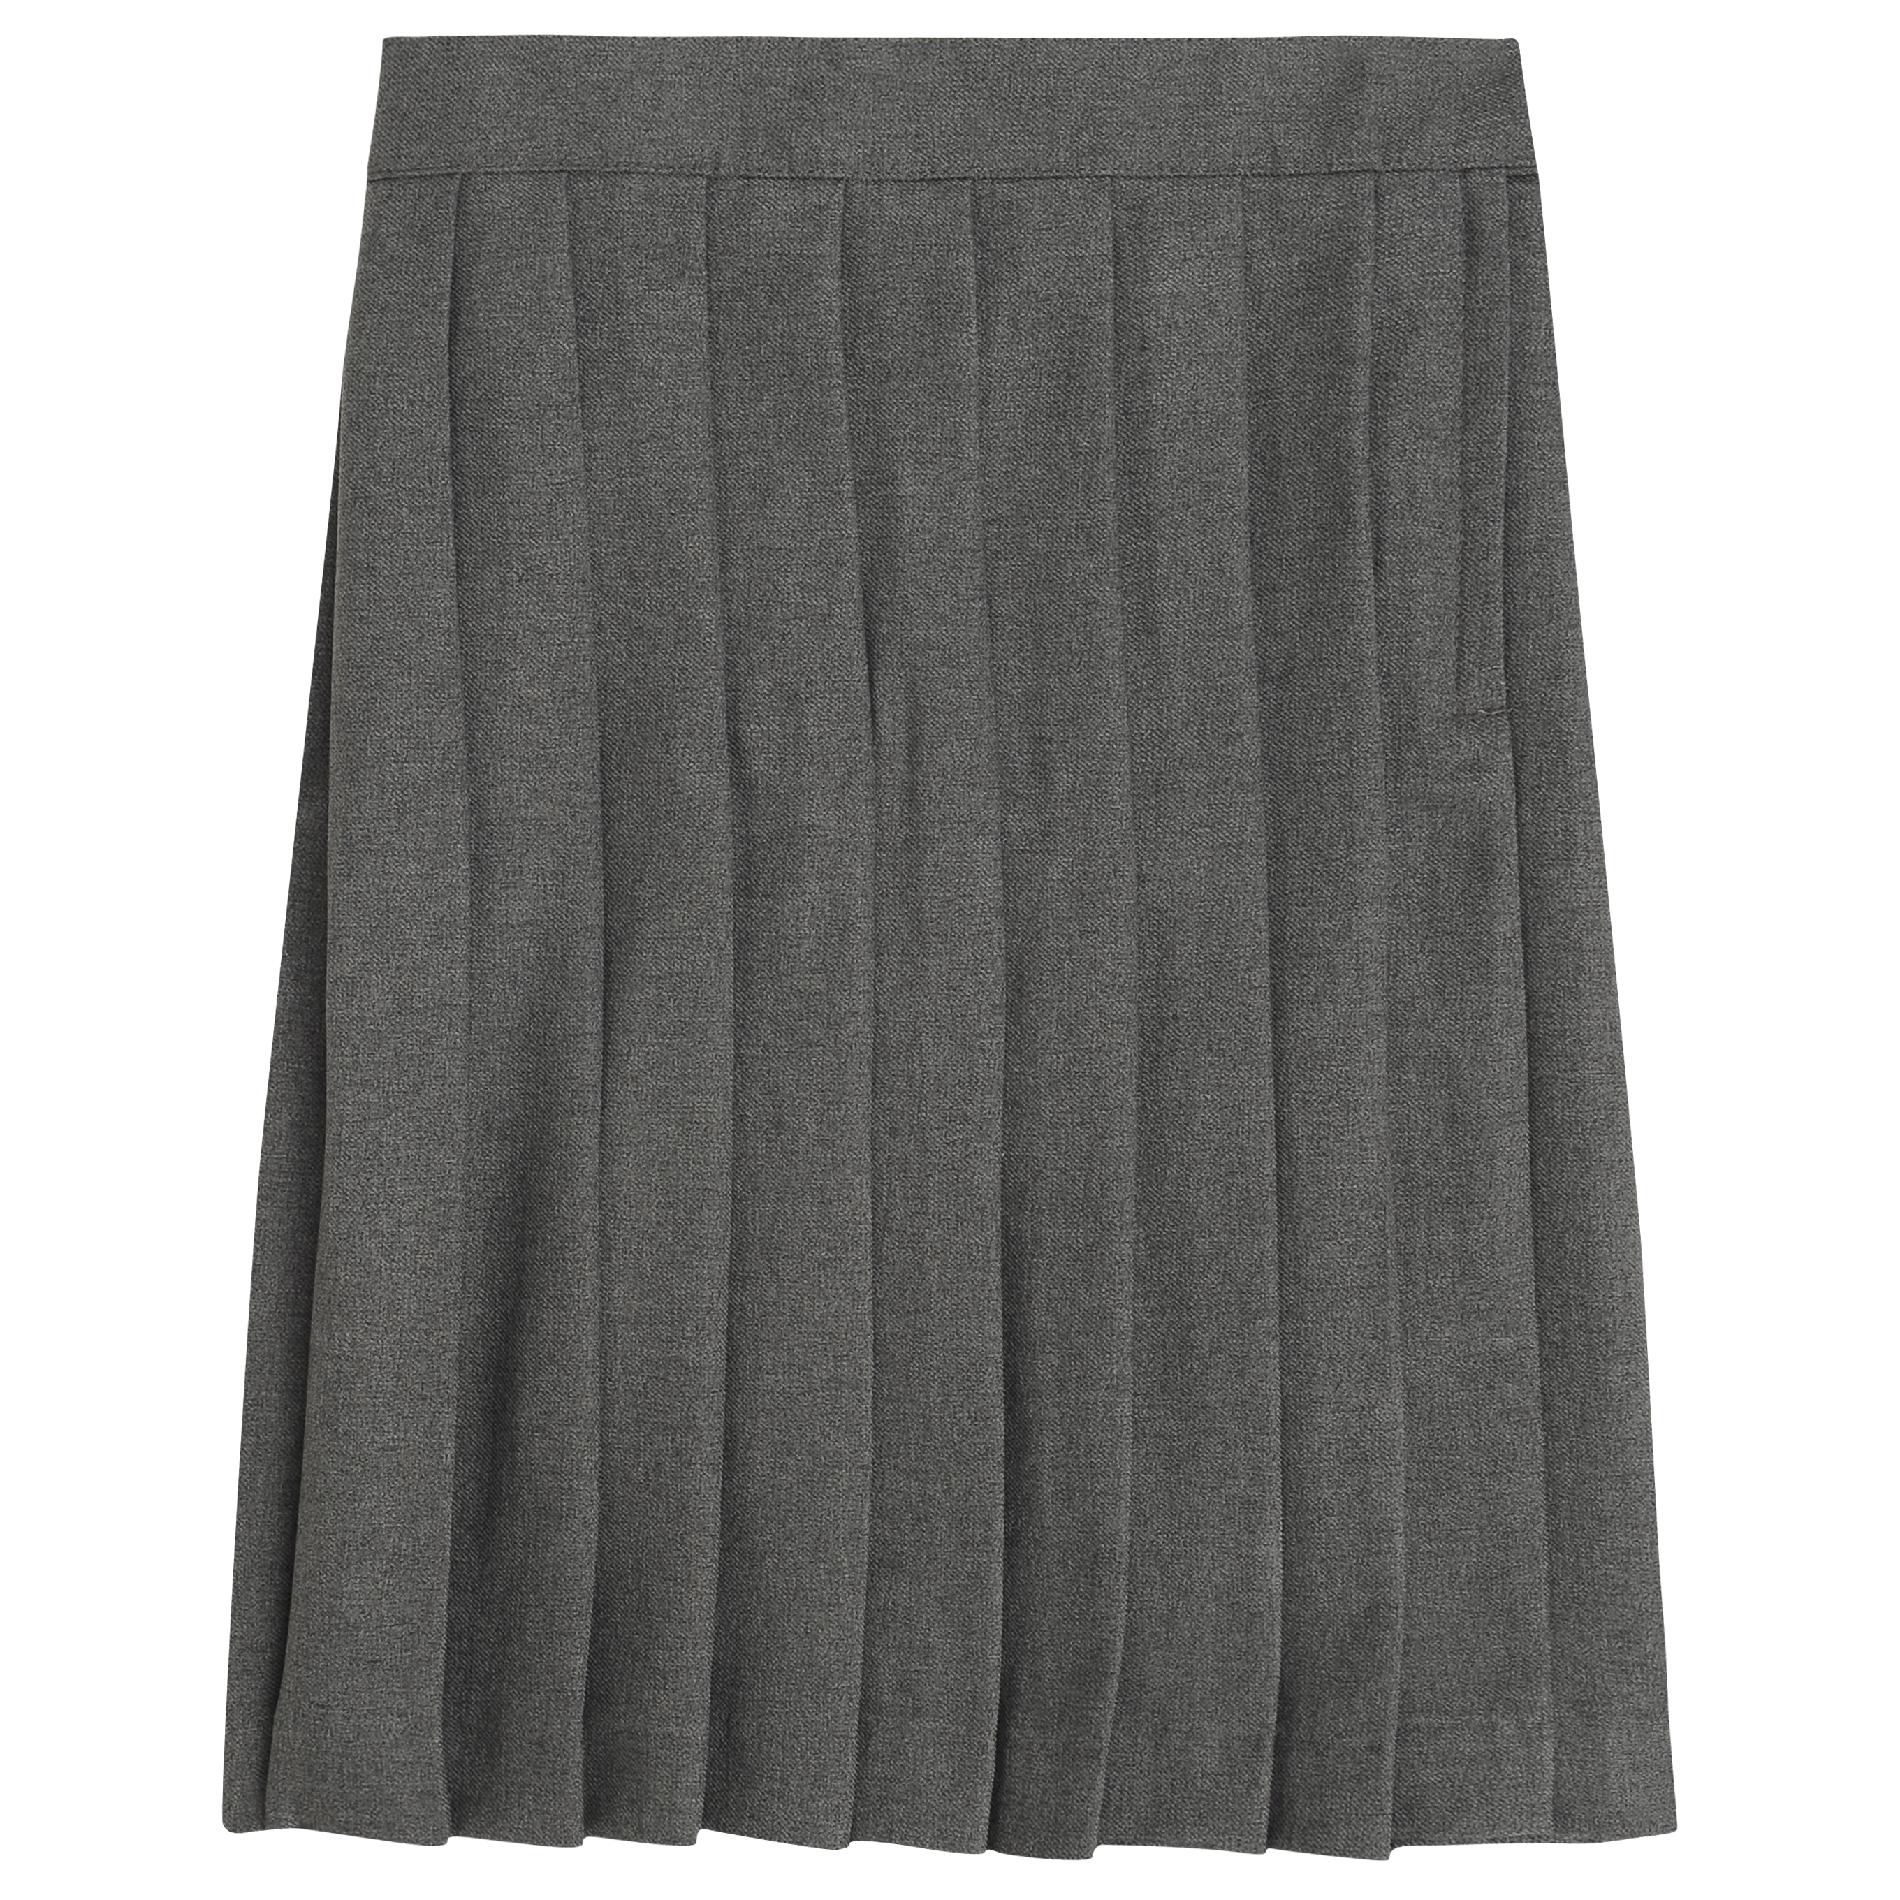 At School by French Toast Girls 7-20 Pleated Skirt